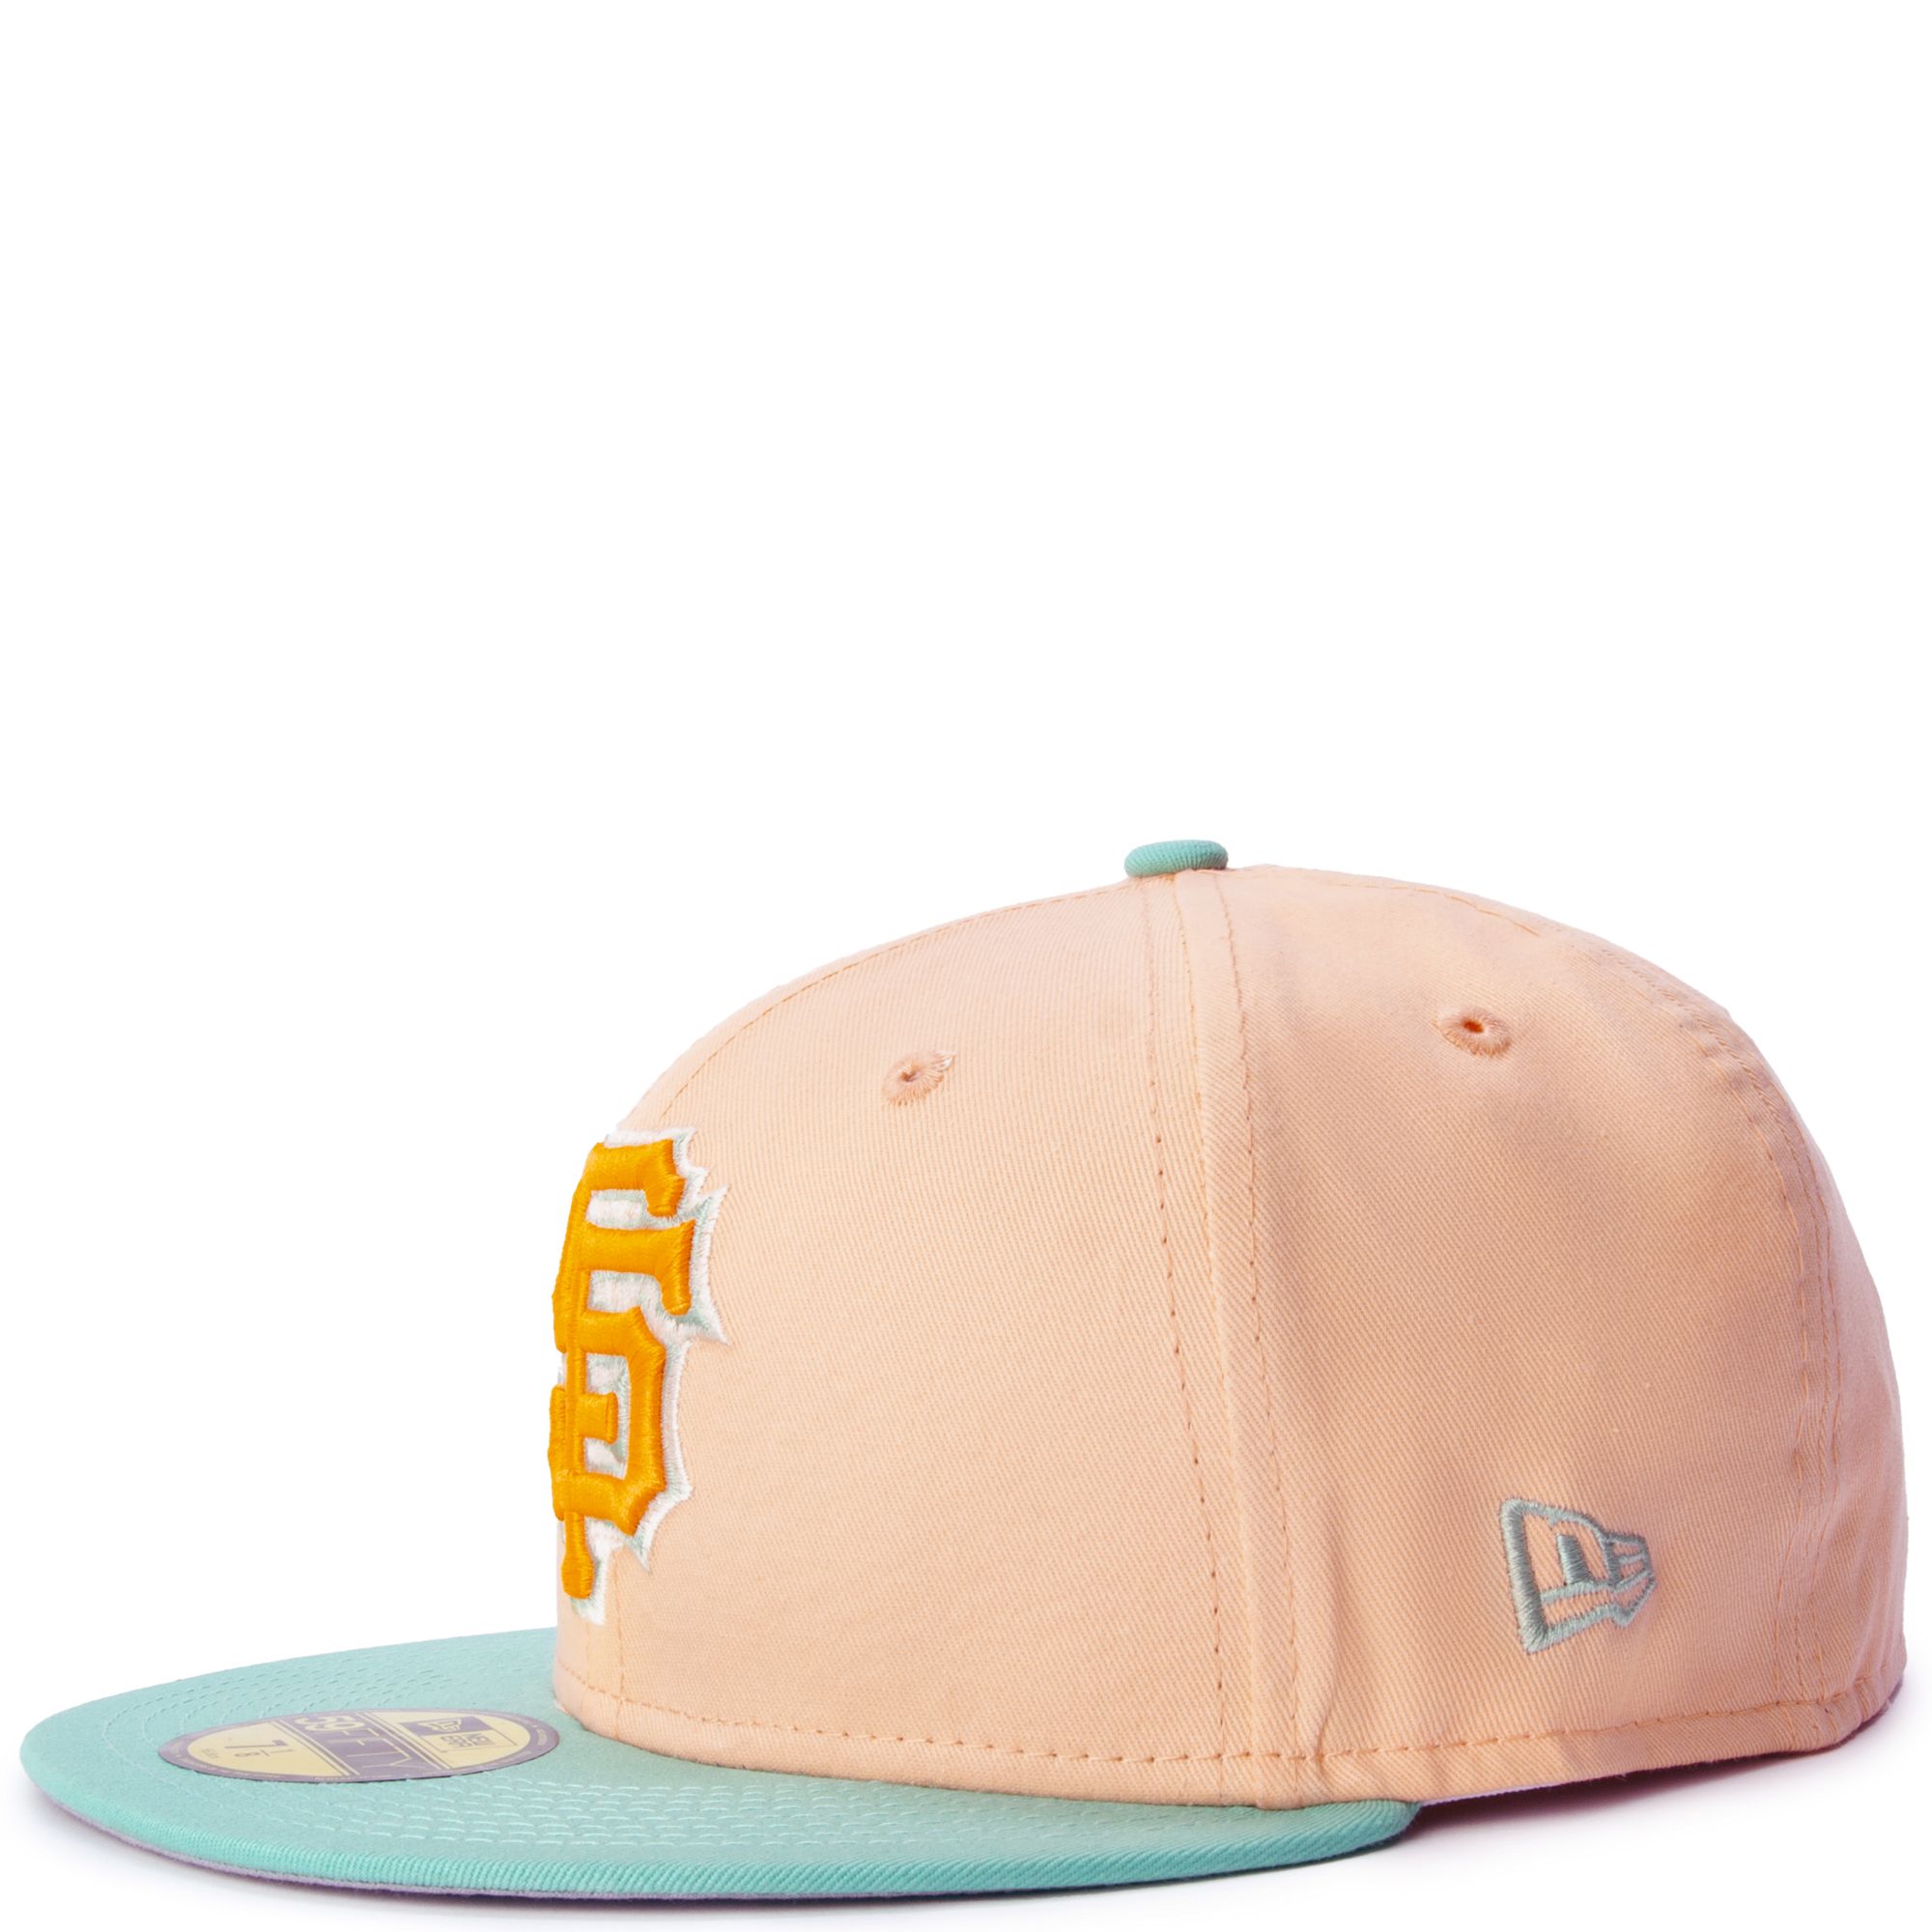 NEW ERA CAPS Tampa Bay Rays Peach Mint 59FIFTY Fitted Hat 70725294 - Shiekh